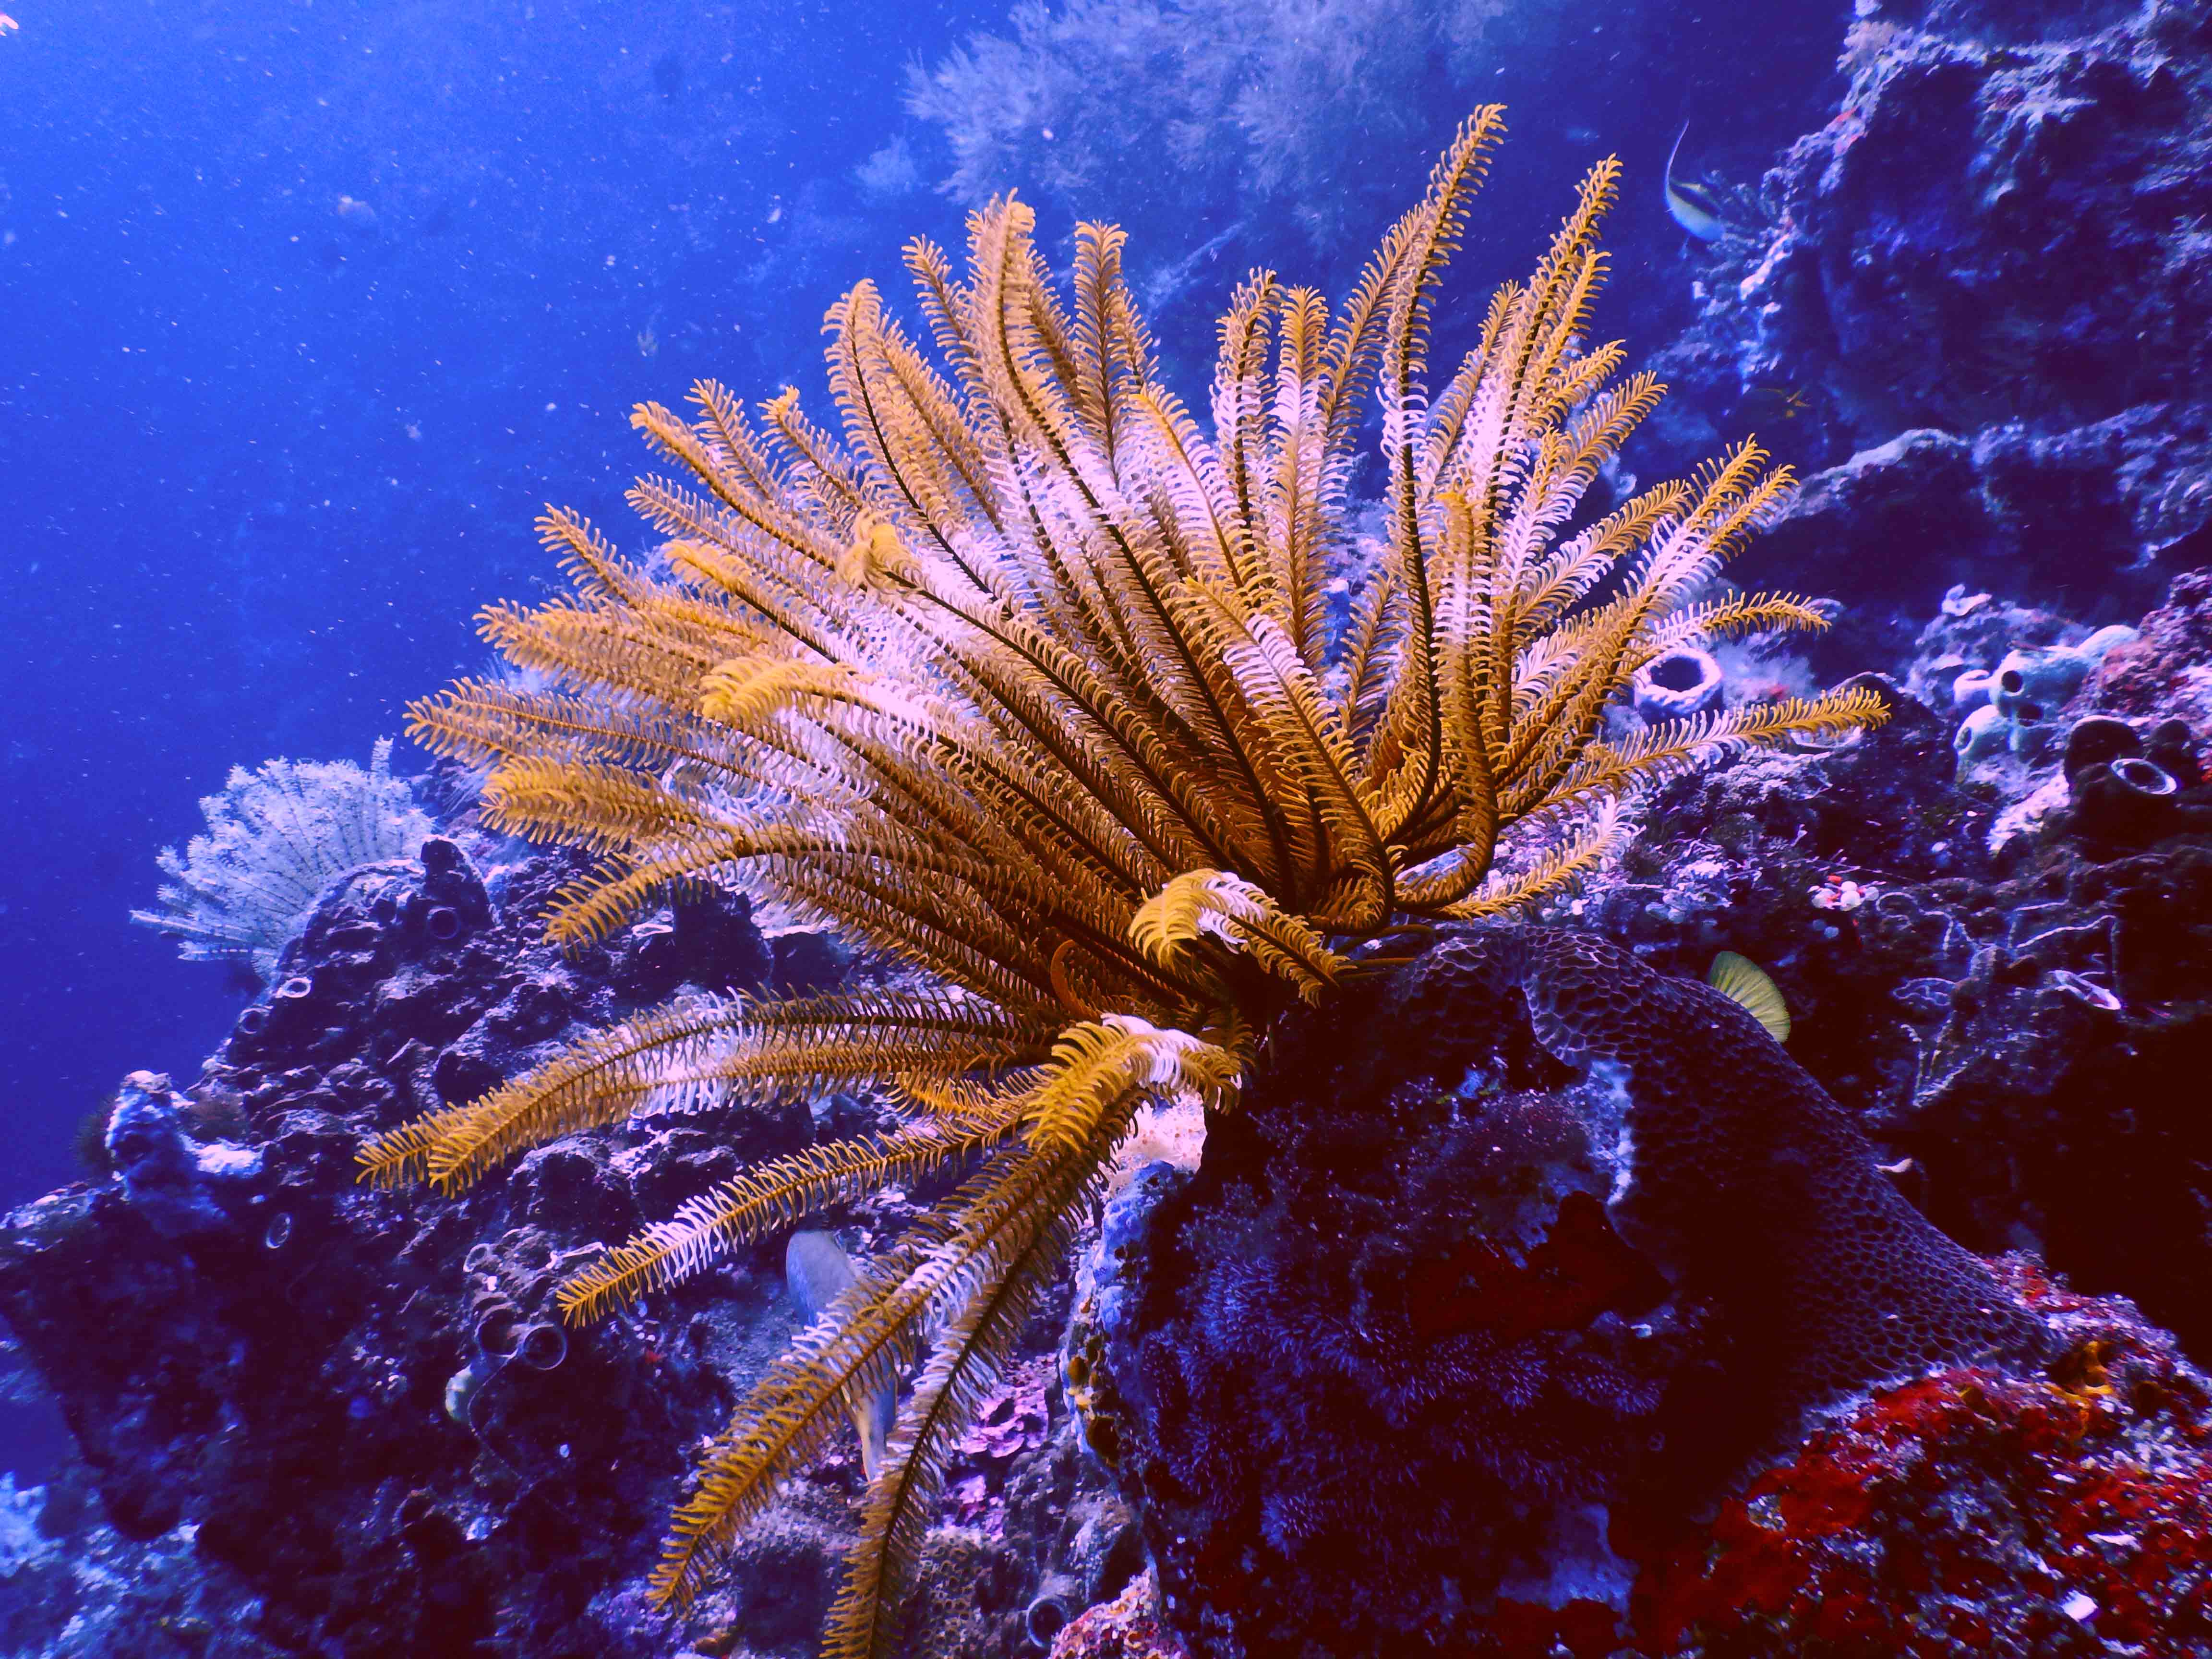 Lighthouse Wreck feather star coral 